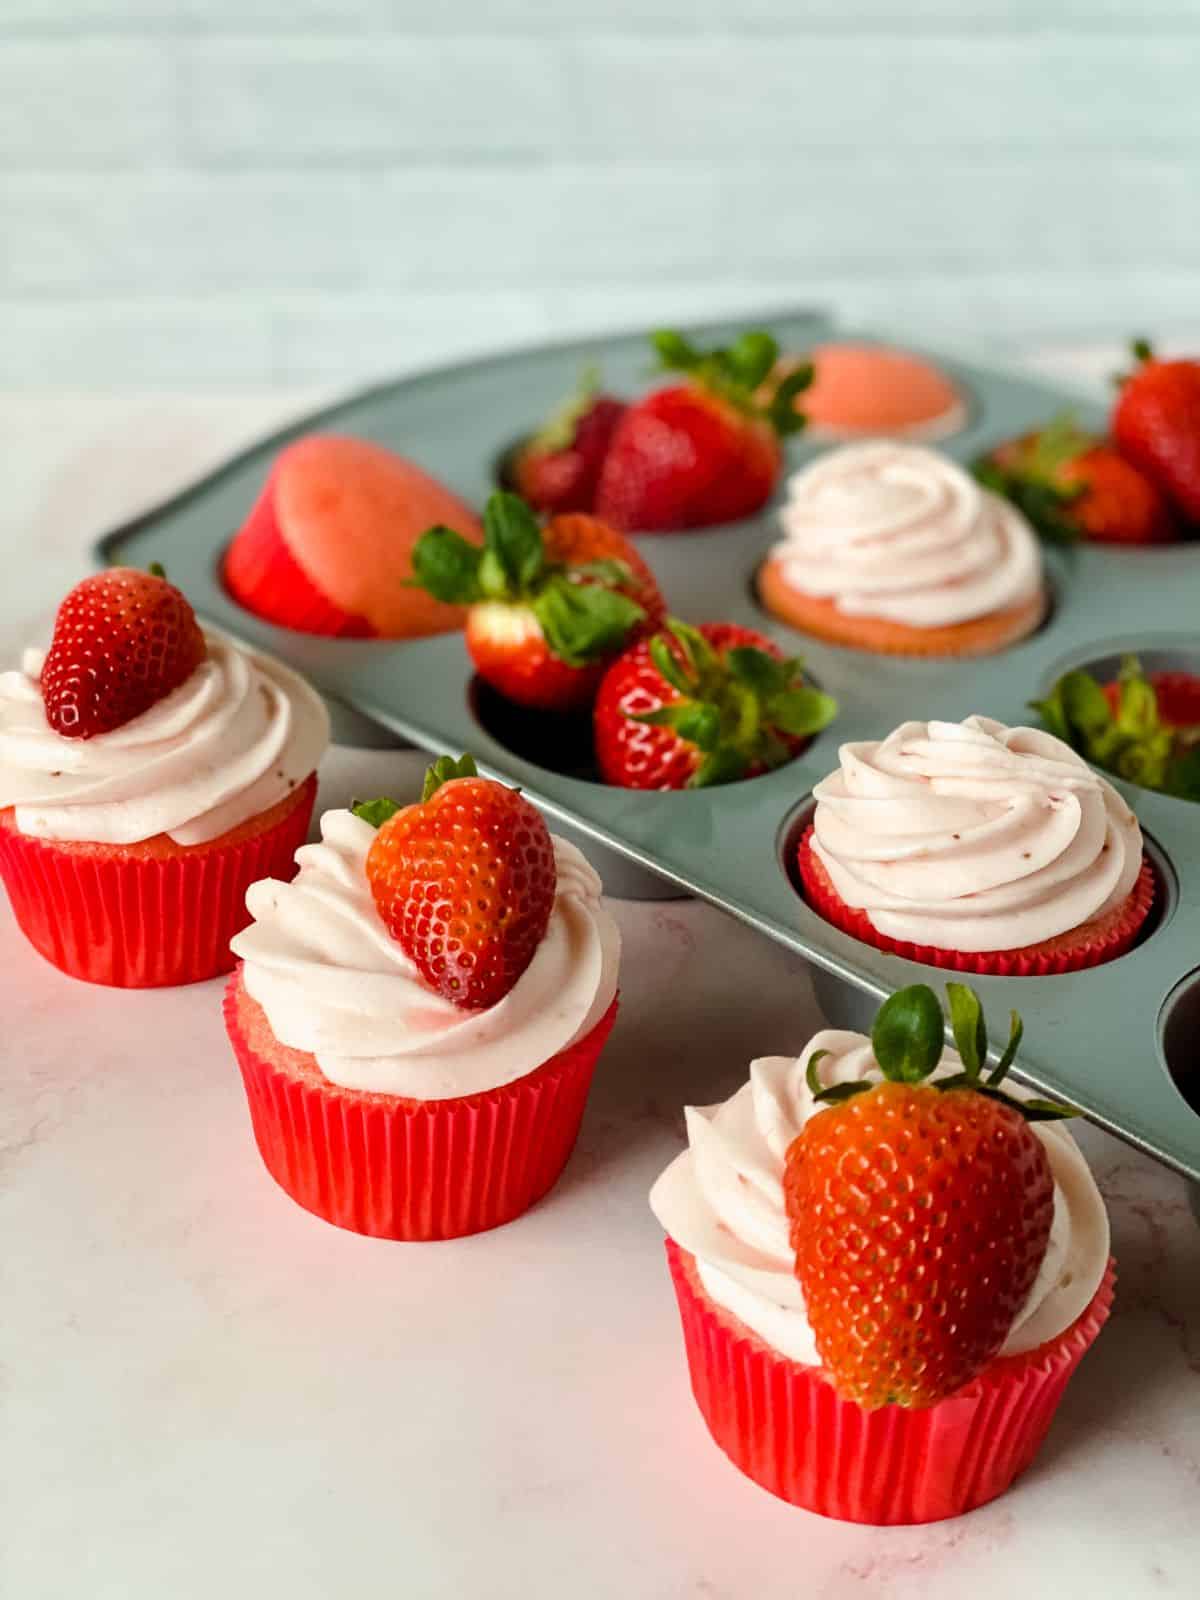 iced strawberry cupcakes on table by baking tin